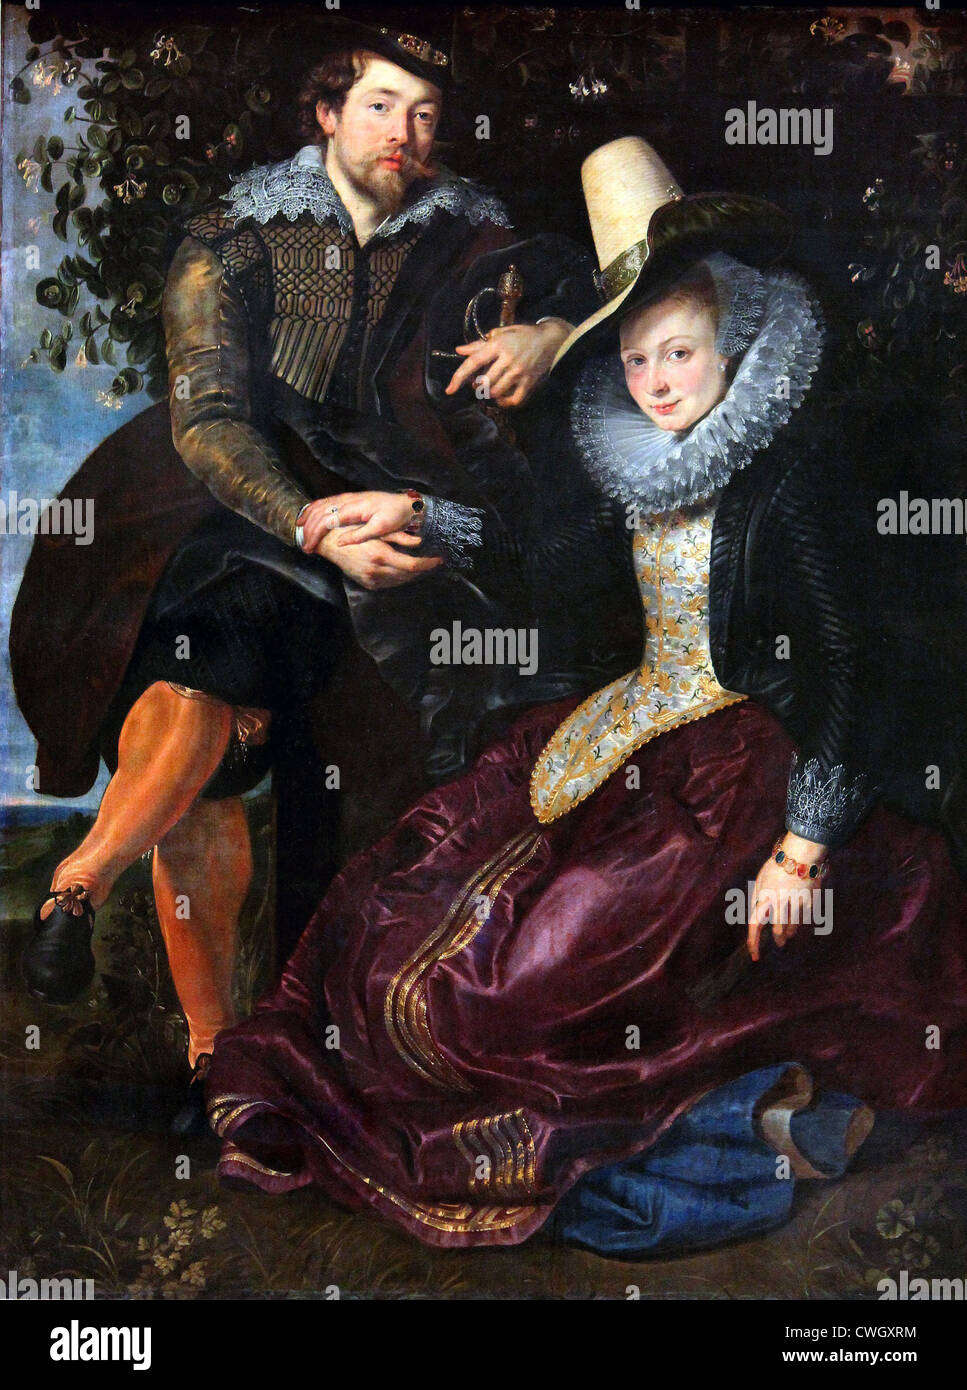 Rubens and Isabella Brant in the Honeysuckle Bower by Peter Paul Rubens Stock Photo